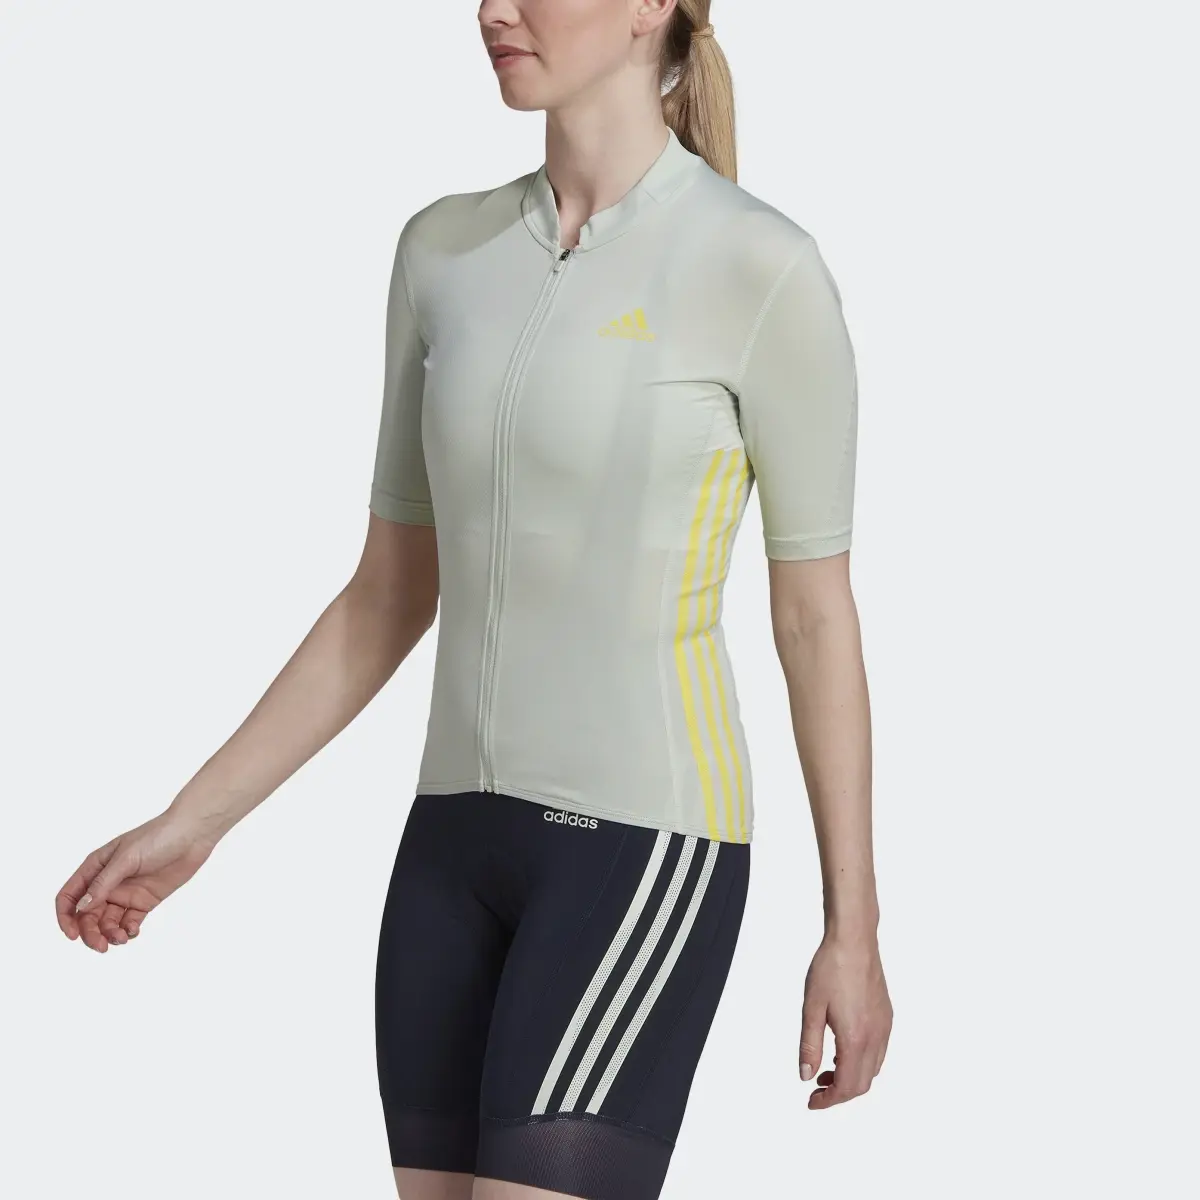 Adidas The Short Sleeve Cycling Jersey. 1